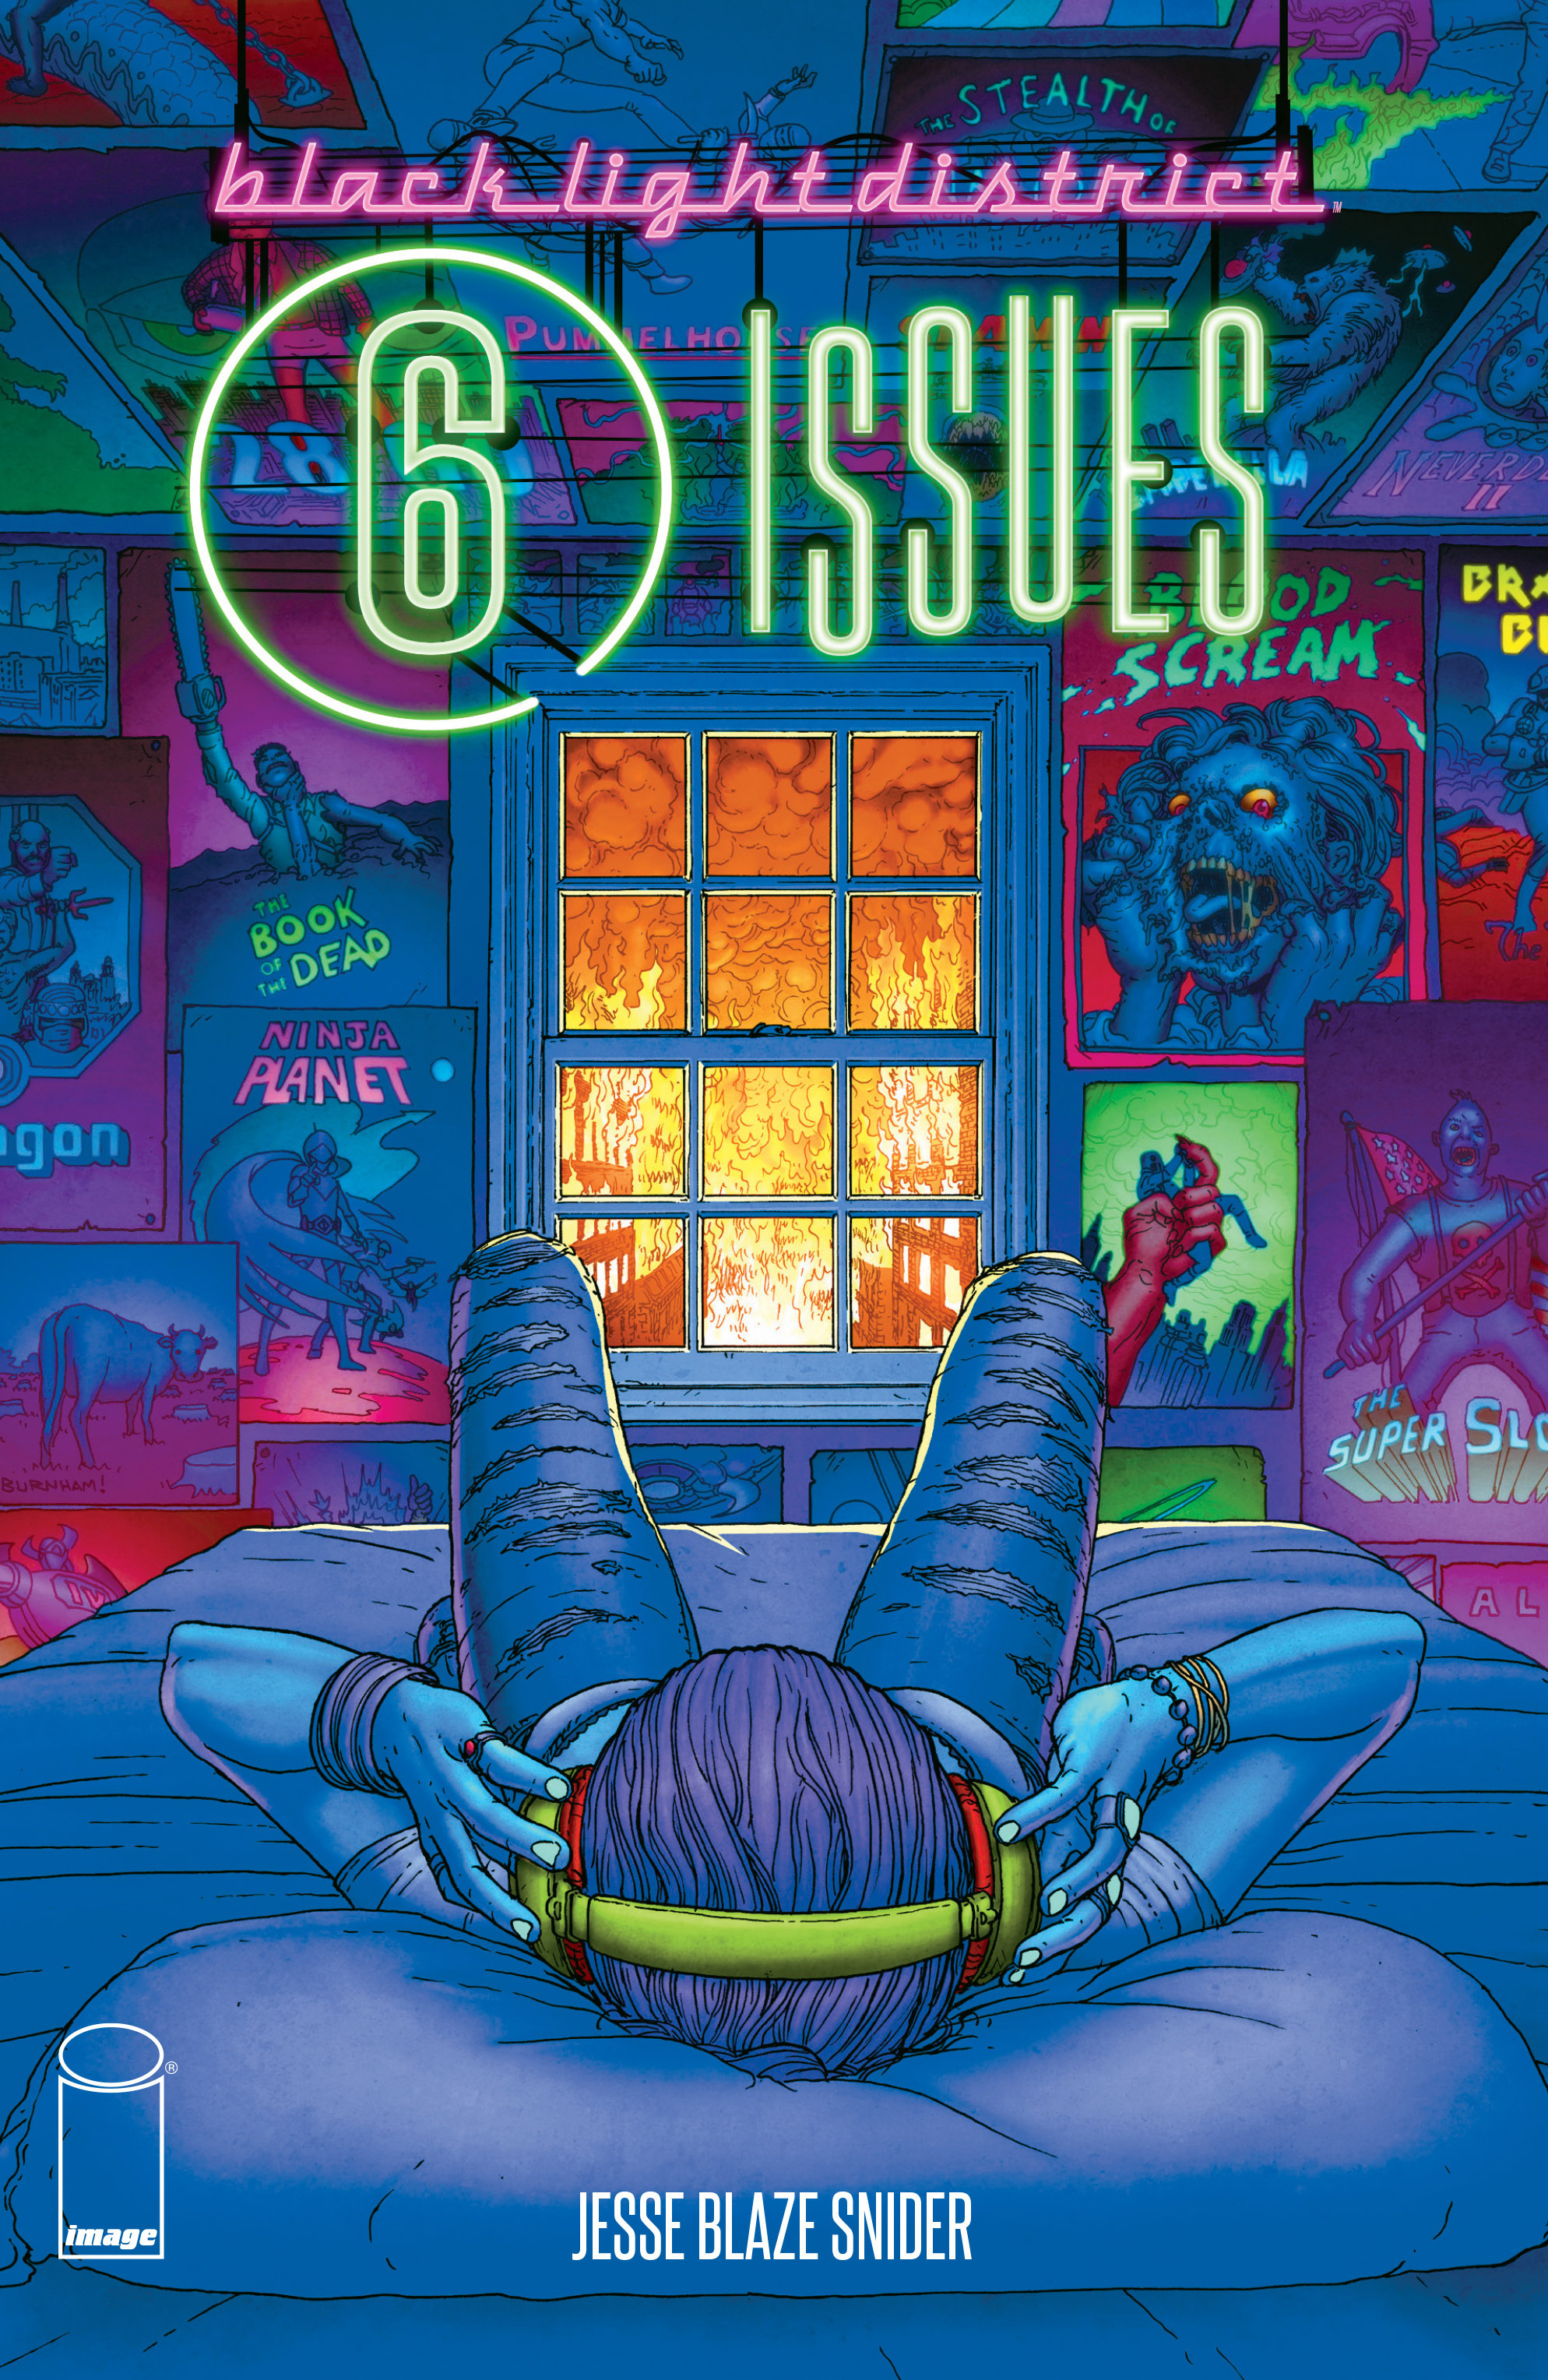 Read online Black Light District: 6 Issues comic -  Issue # Full - 1